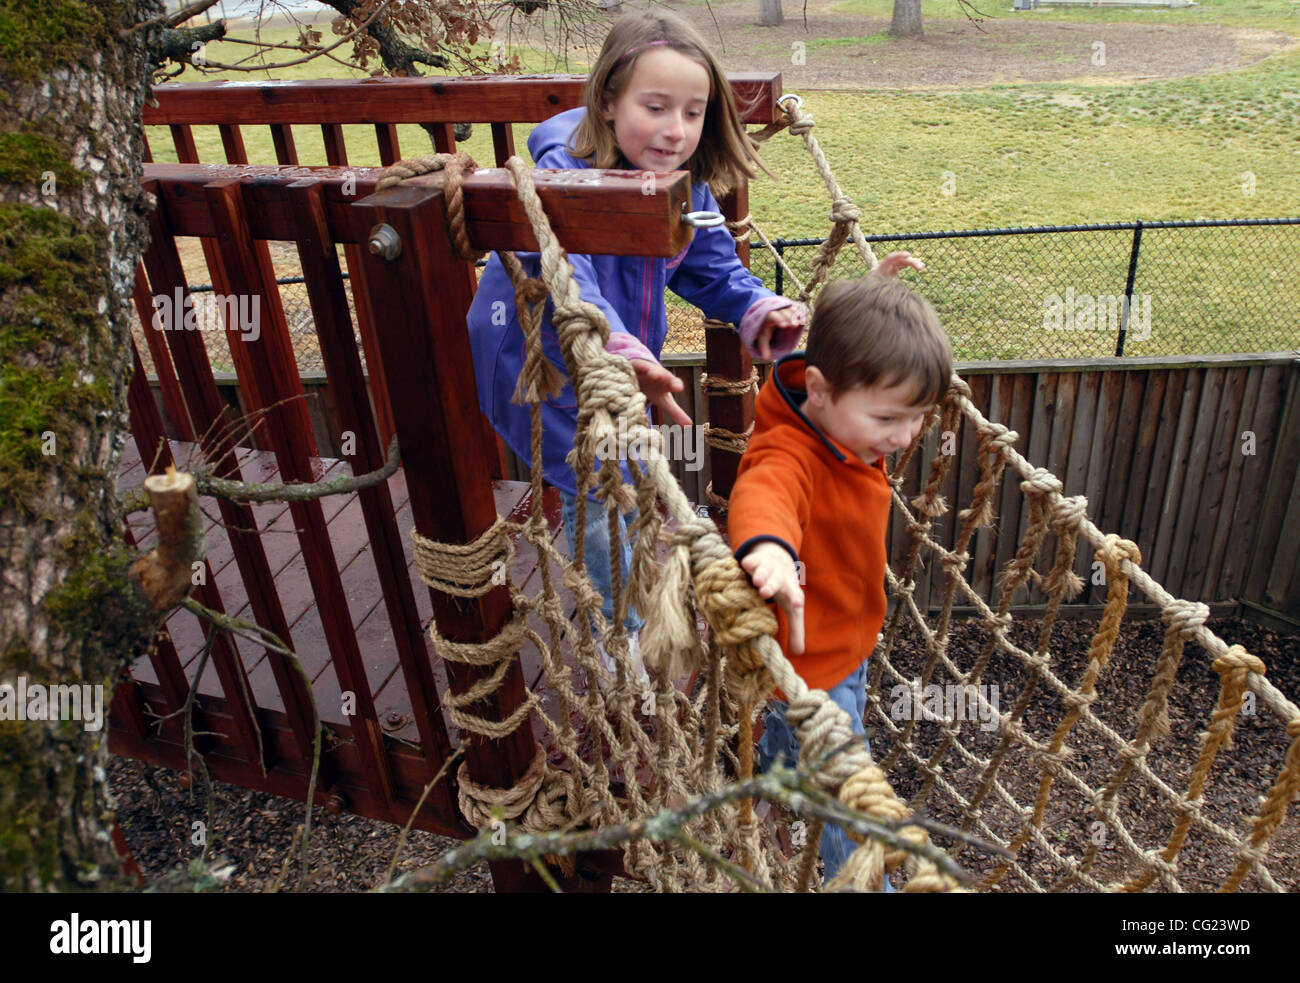 Jeremy Sanders not only built a playground, but also a rope bridge for his  kids Jamie Sanders (cq, left), 6, and Coltin Sanders (cq, right), 5, in his  backyard in Roseville, February